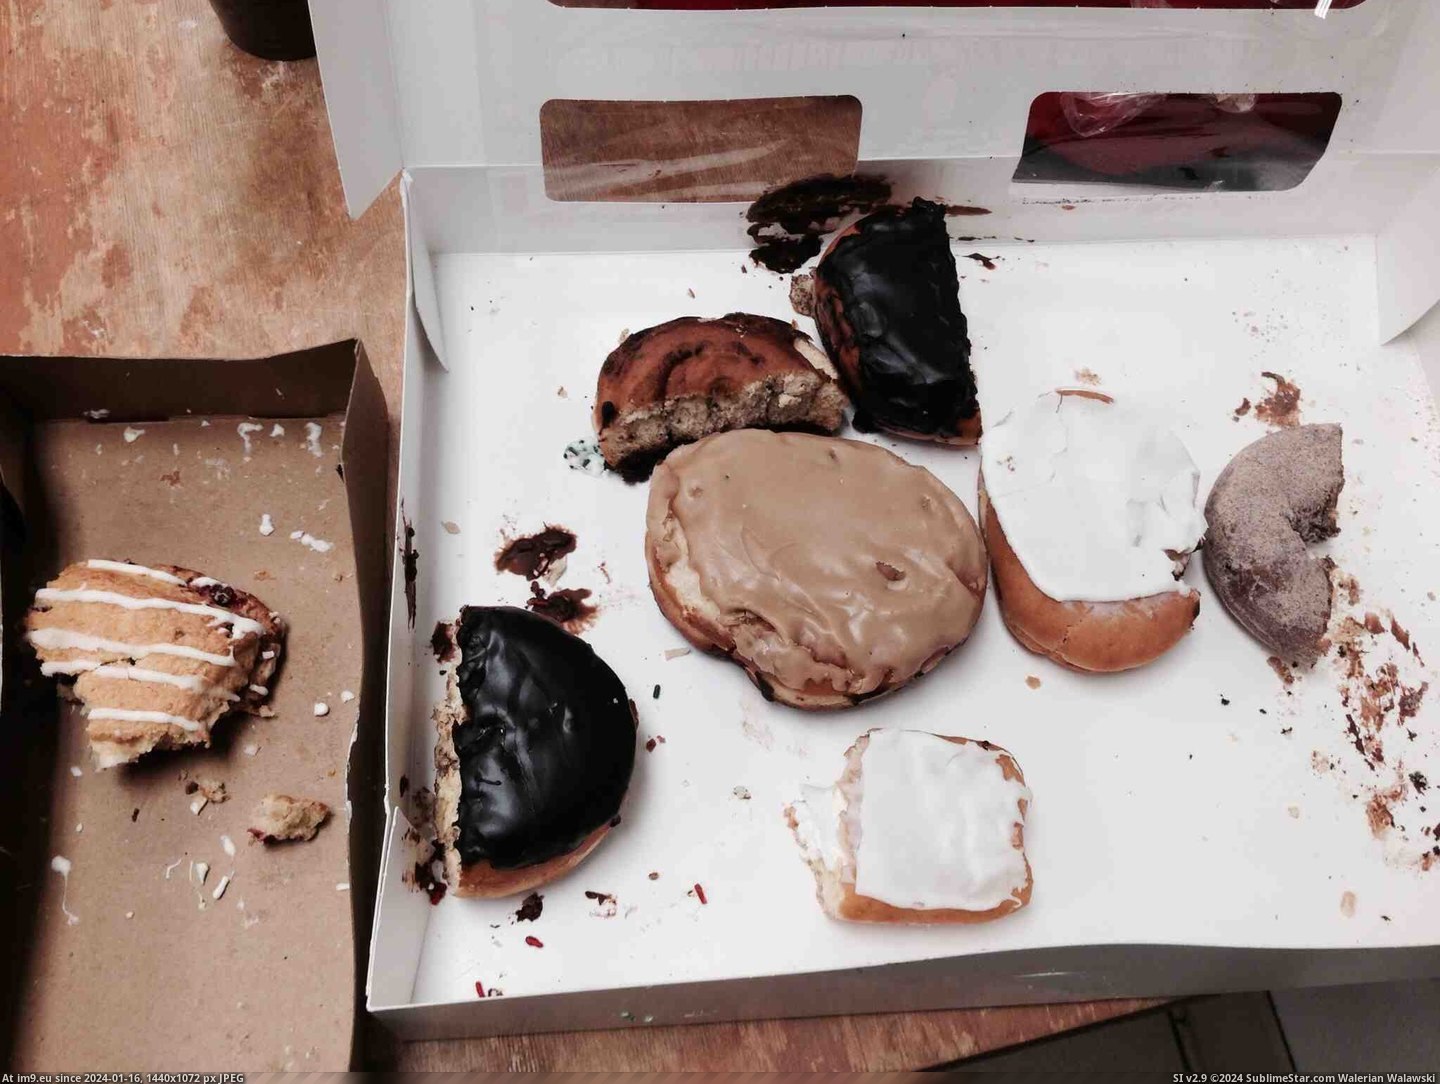 #You #Work #Females #Donuts #Brings [Pics] This is what happens when someone brings in donuts and you work with many females. Pic. (Bild von album My r/PICS favs))